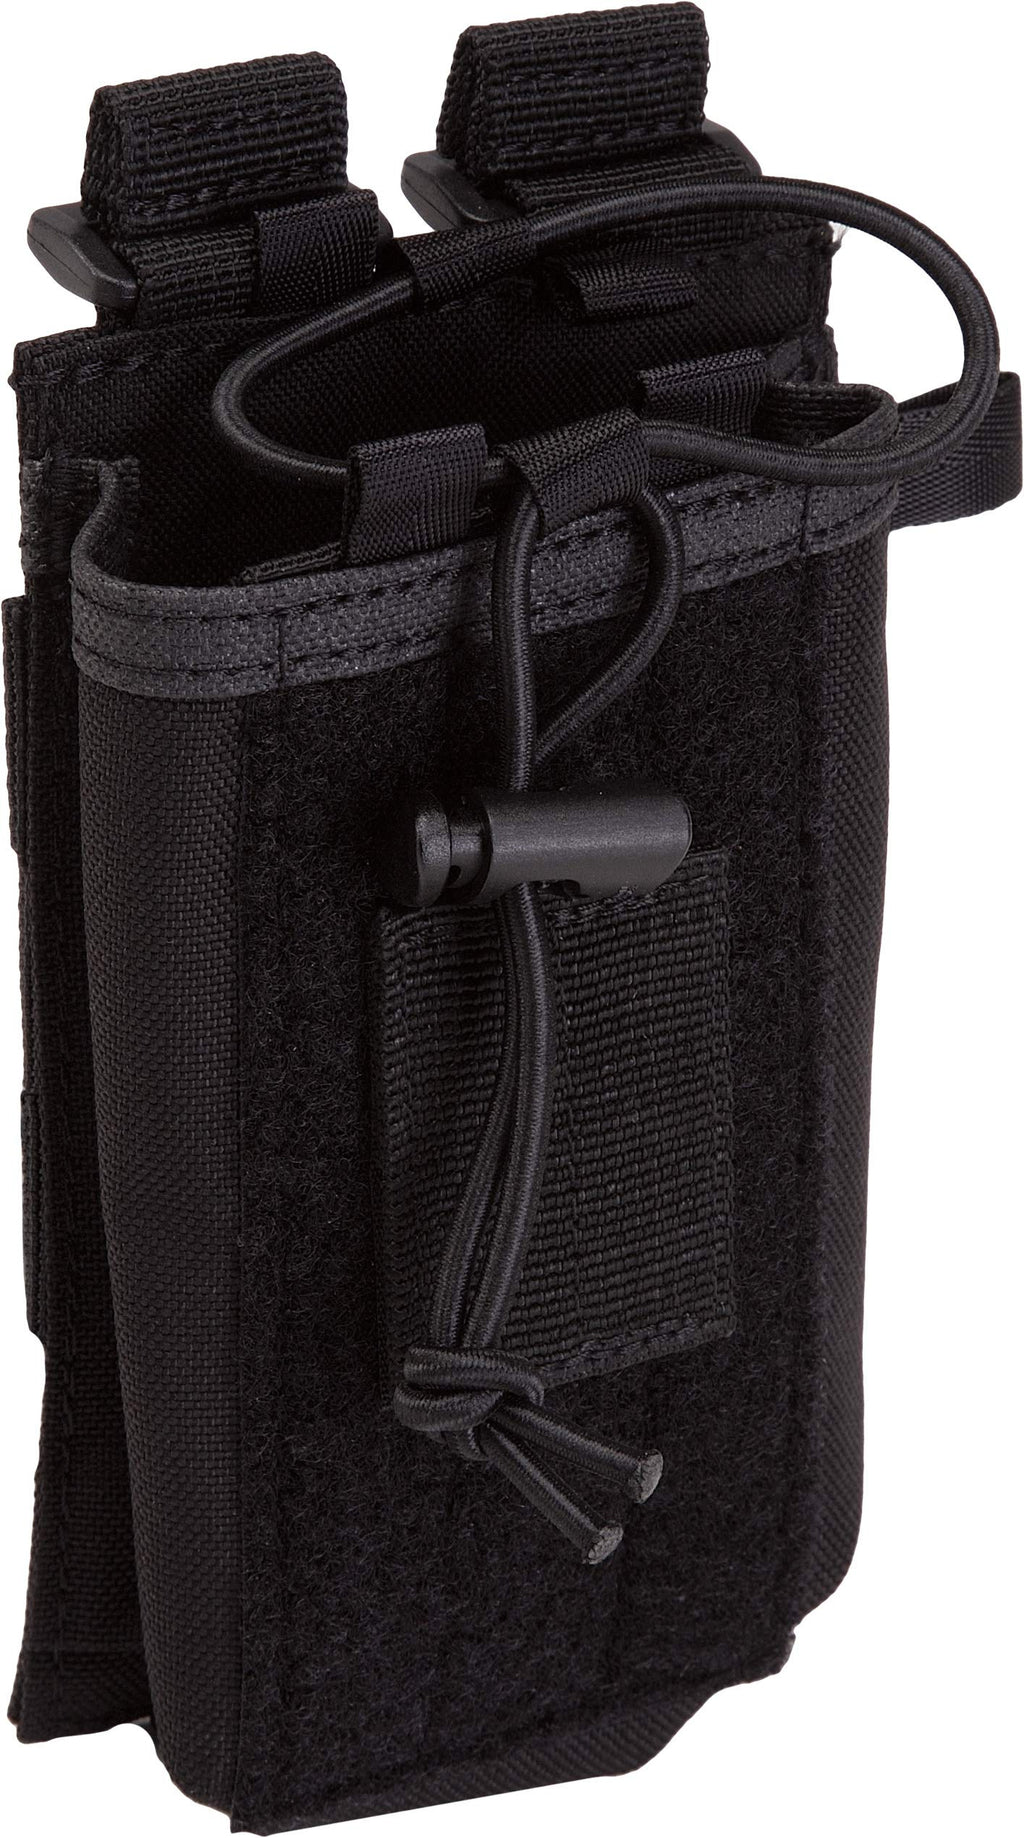 5.11 Radio Pouch Compatible Bags/Packs/Duffels, Style 58718 Black